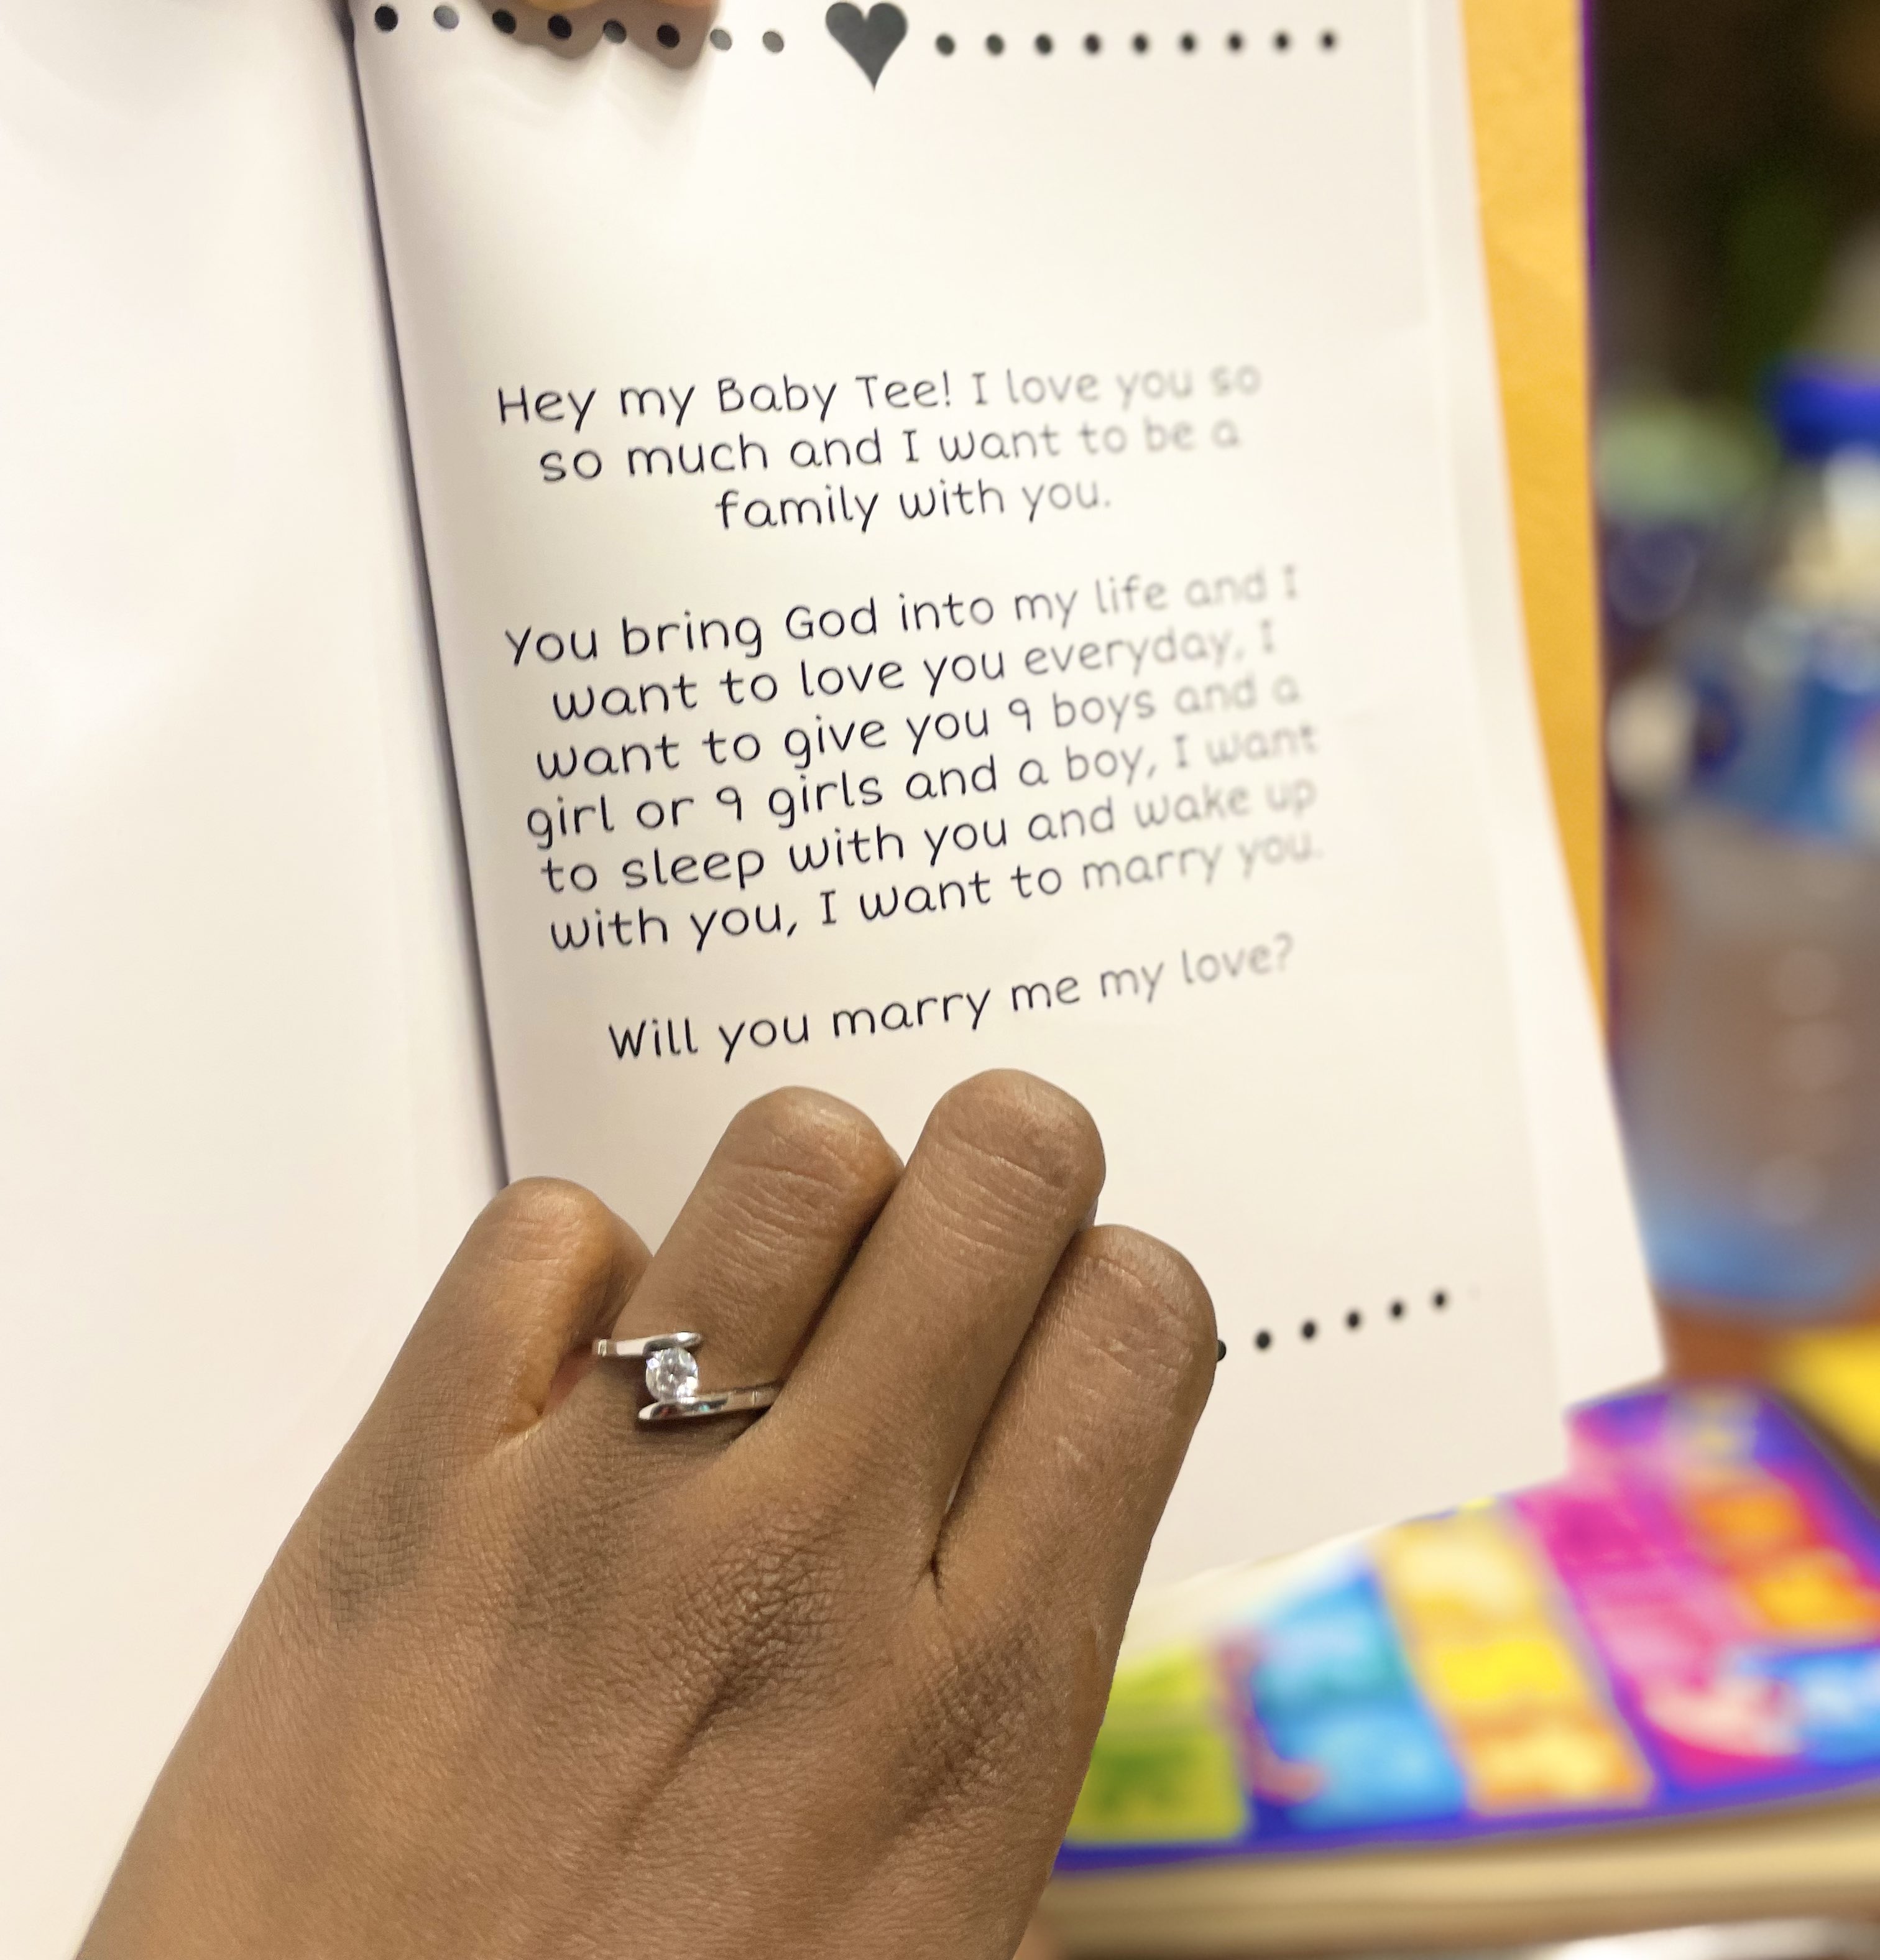 Nigerian lady who loves to read gets proposed to with a 42-page book